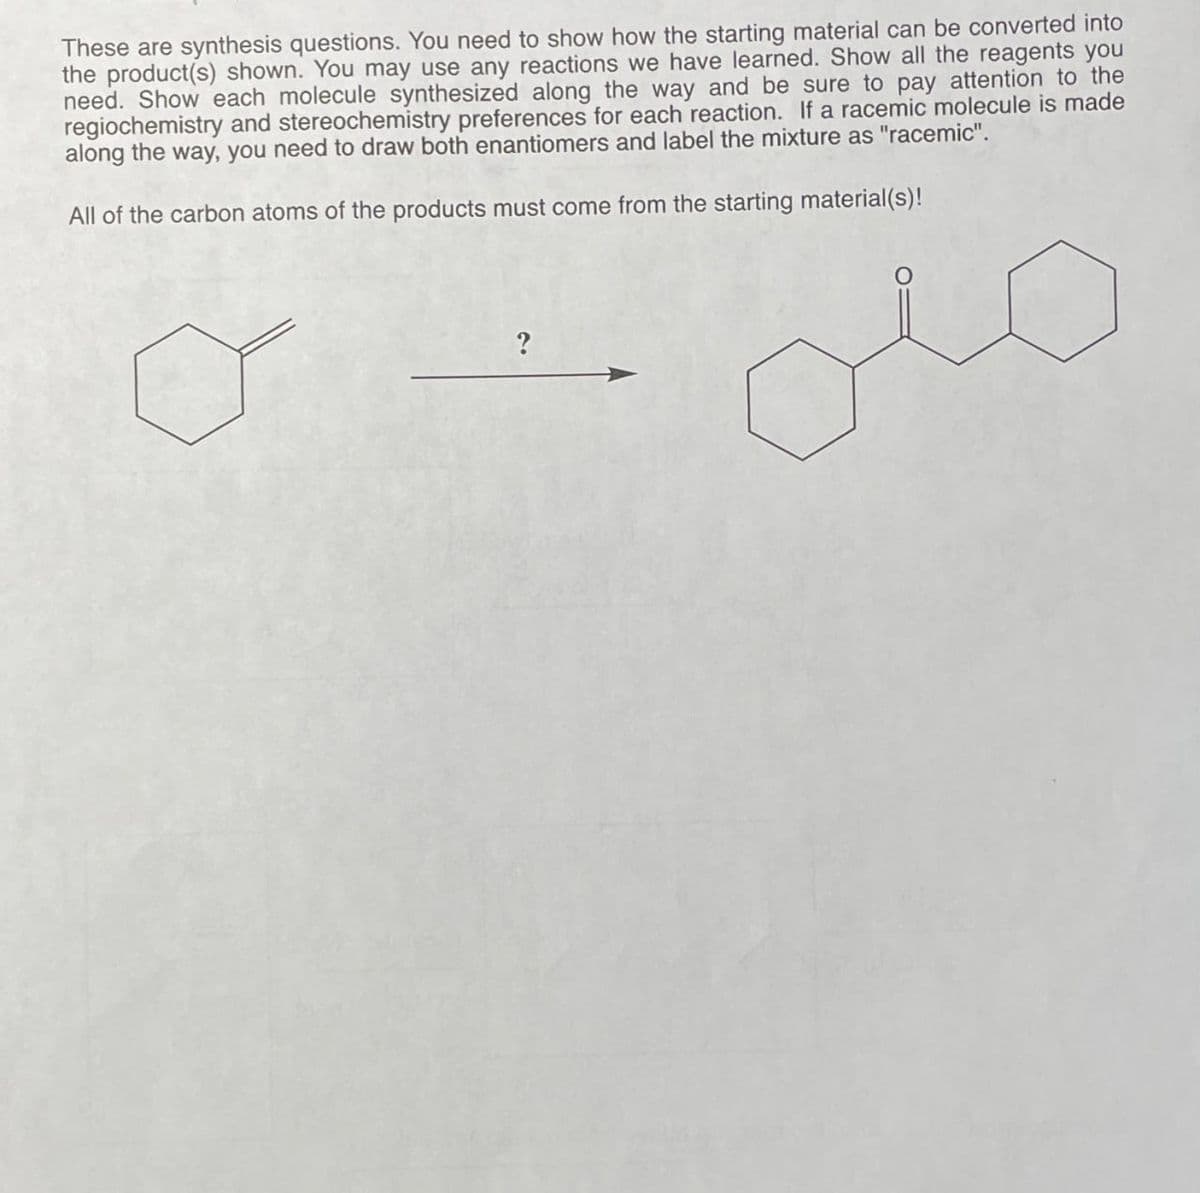 These are synthesis questions. You need to show how the starting material can be converted into
the product(s) shown. You may use any reactions we have learned. Show all the reagents you
need. Show each molecule synthesized along the way and be sure to pay attention to the
regiochemistry and stereochemistry preferences for each reaction. If a racemic molecule is made
along the way, you need to draw both enantiomers and label the mixture as "racemic".
All of the carbon atoms of the products must come from the starting material(s)!
?
عنی